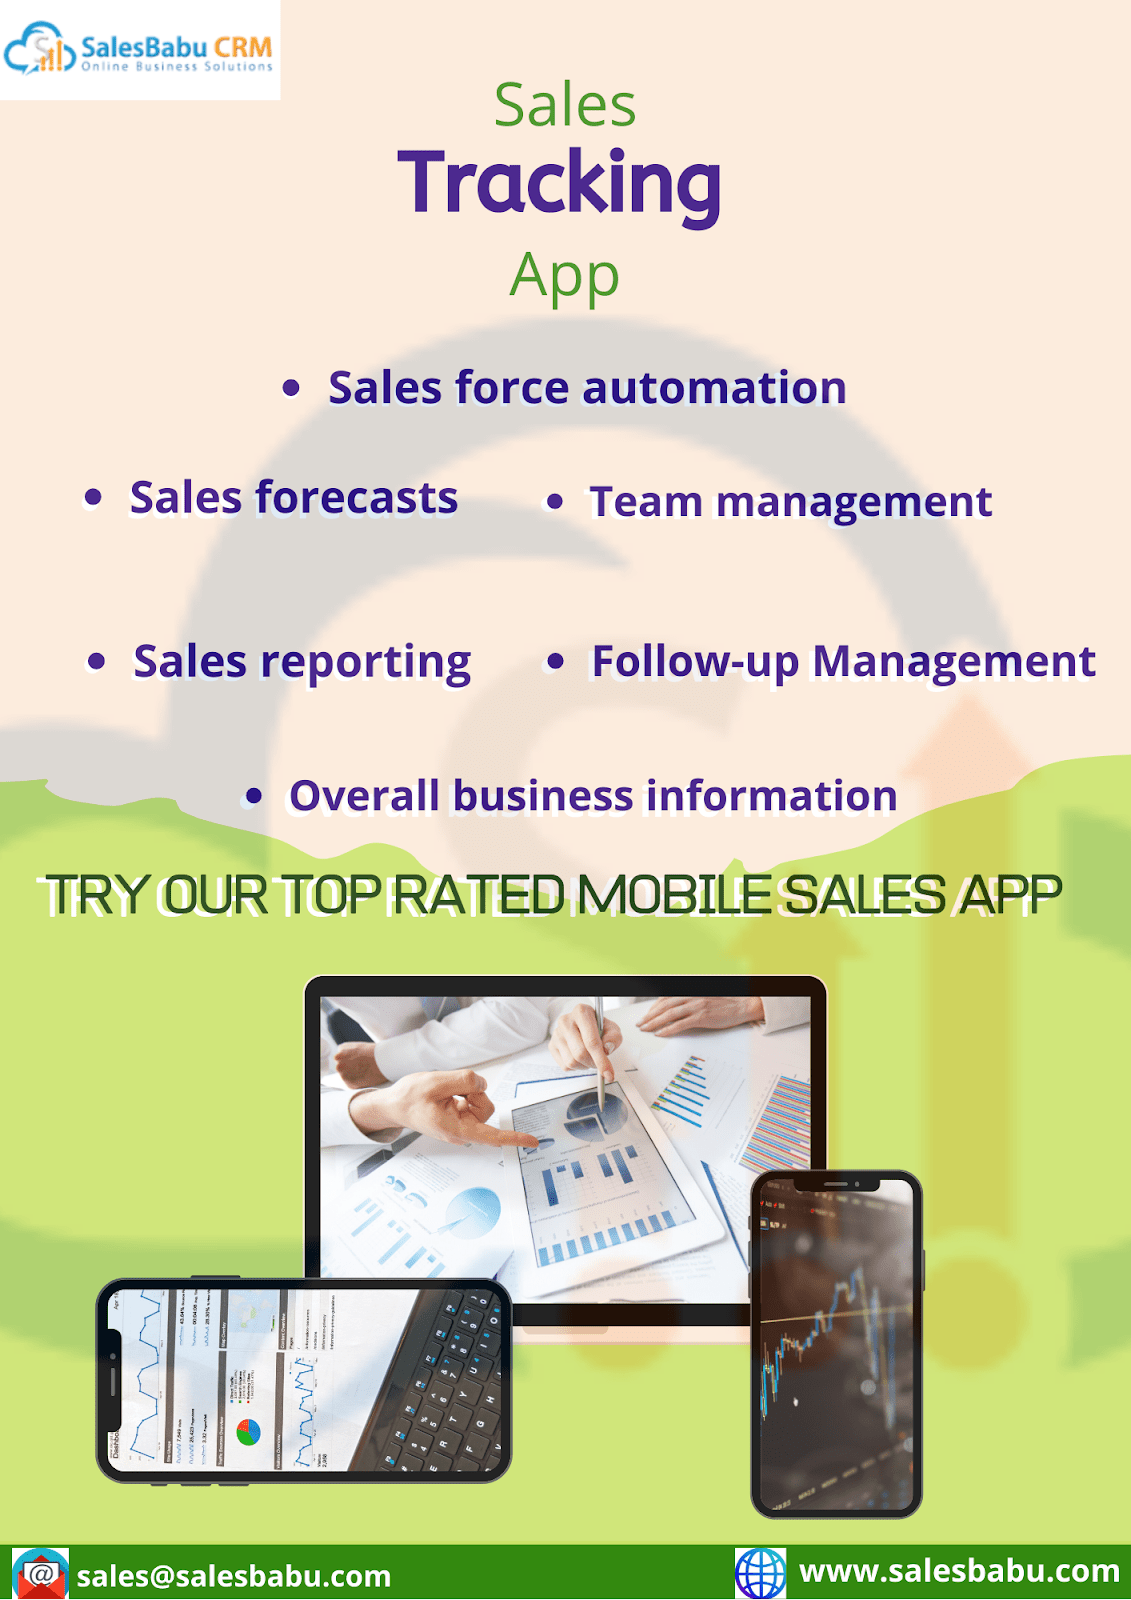 Sales Tracking App Features